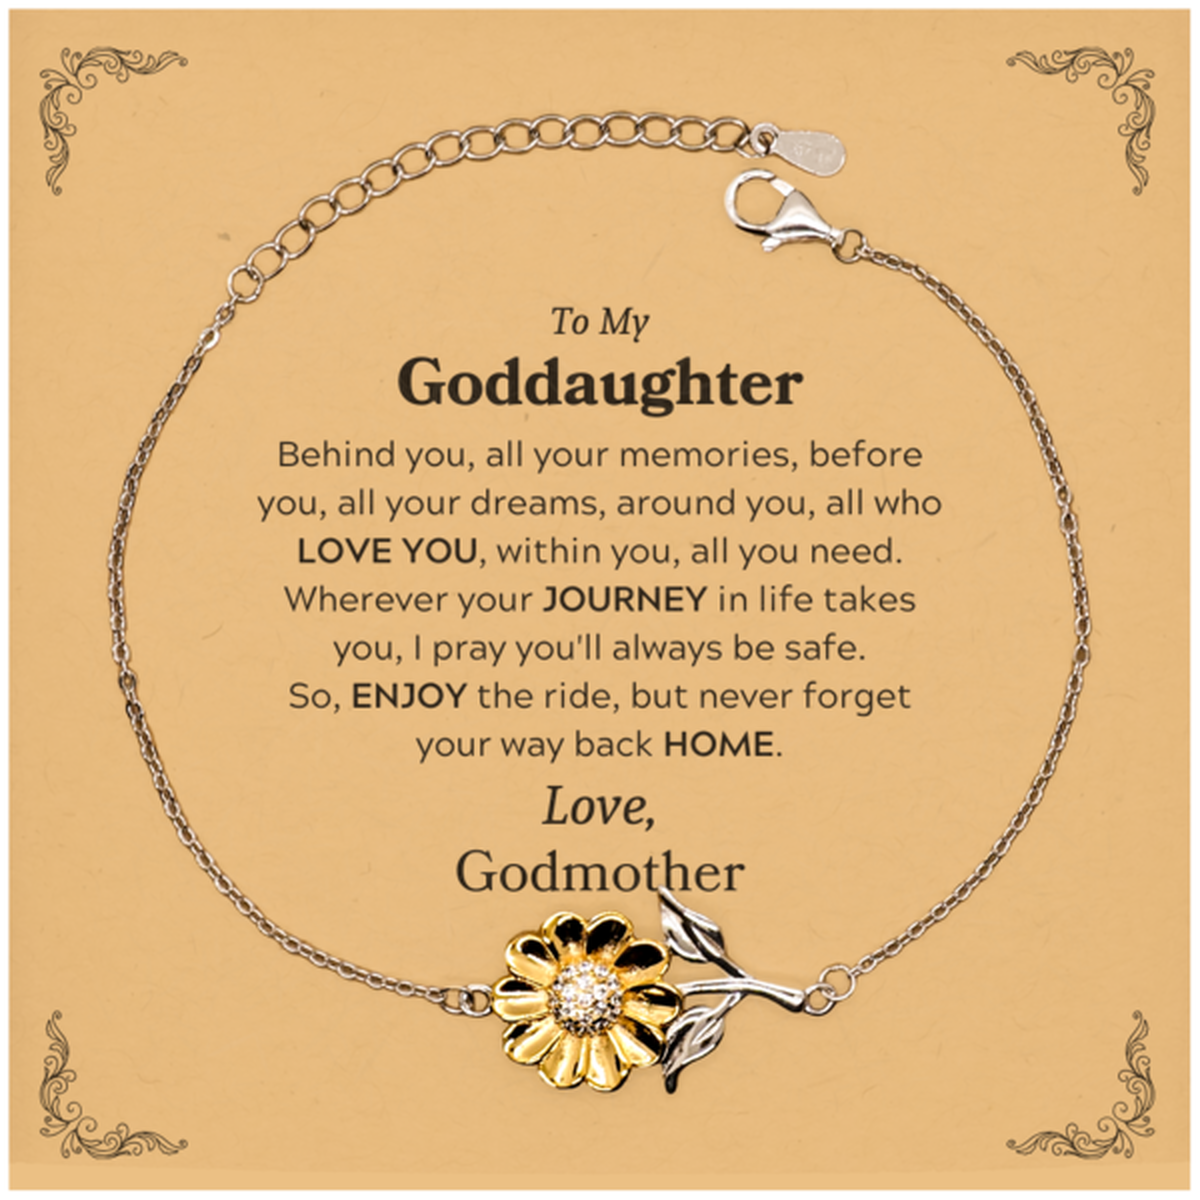 To My Goddaughter Graduation Gifts from Godmother, Goddaughter Sunflower Bracelet Christmas Birthday Gifts for Goddaughter Behind you, all your memories, before you, all your dreams. Love, Godmother